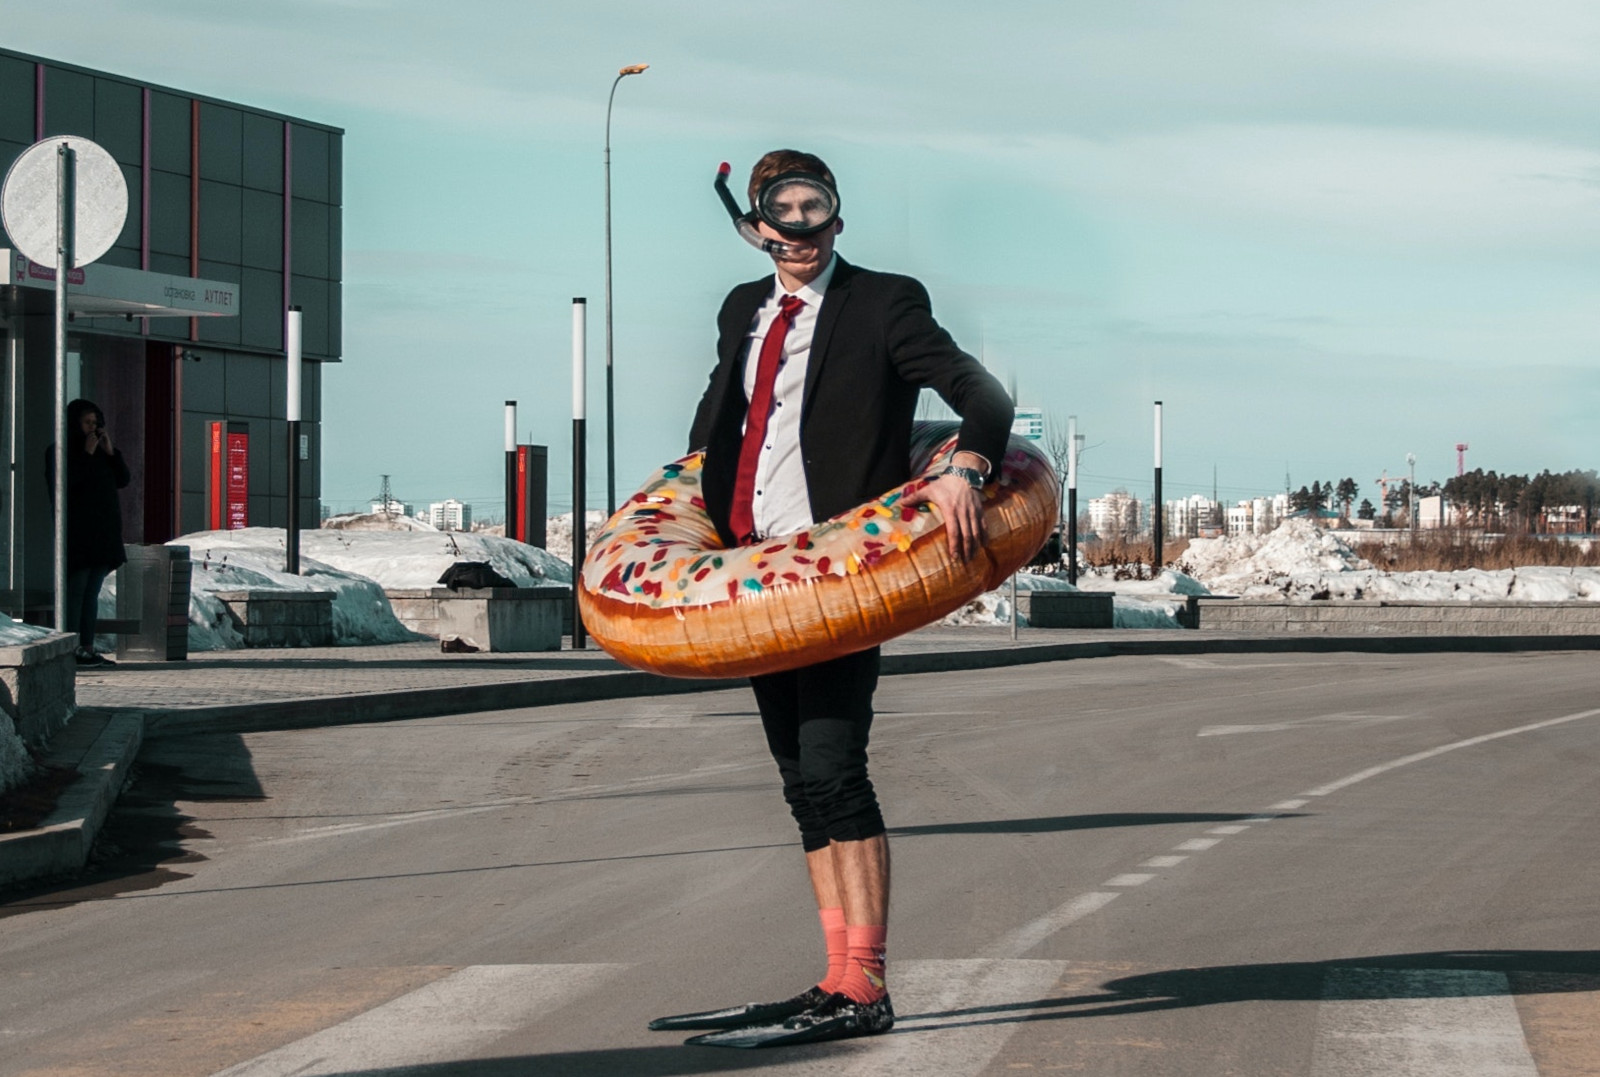 Crazy man wearing a plastic donut and snorkel gear while wearing a suit